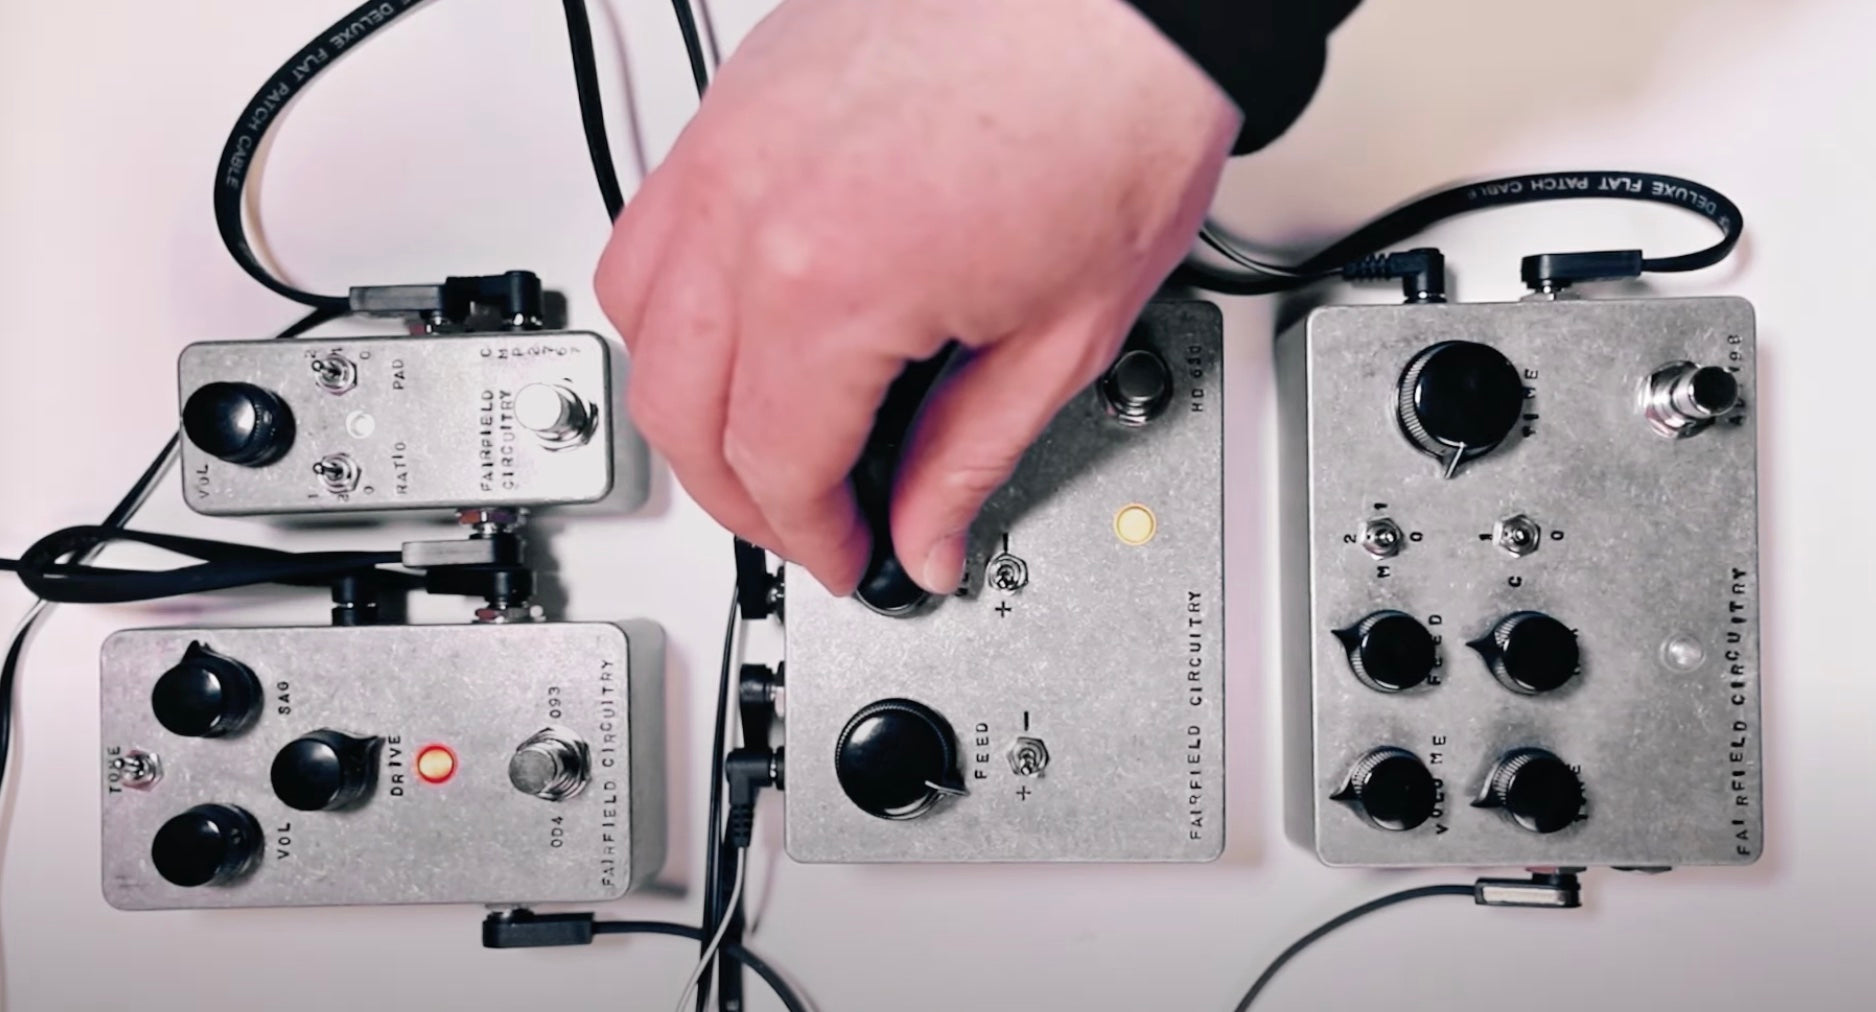 Load video: A closer look at the Fairfield Circuitry - Hors d&#39;Oeuvre? active feedback loop pedal